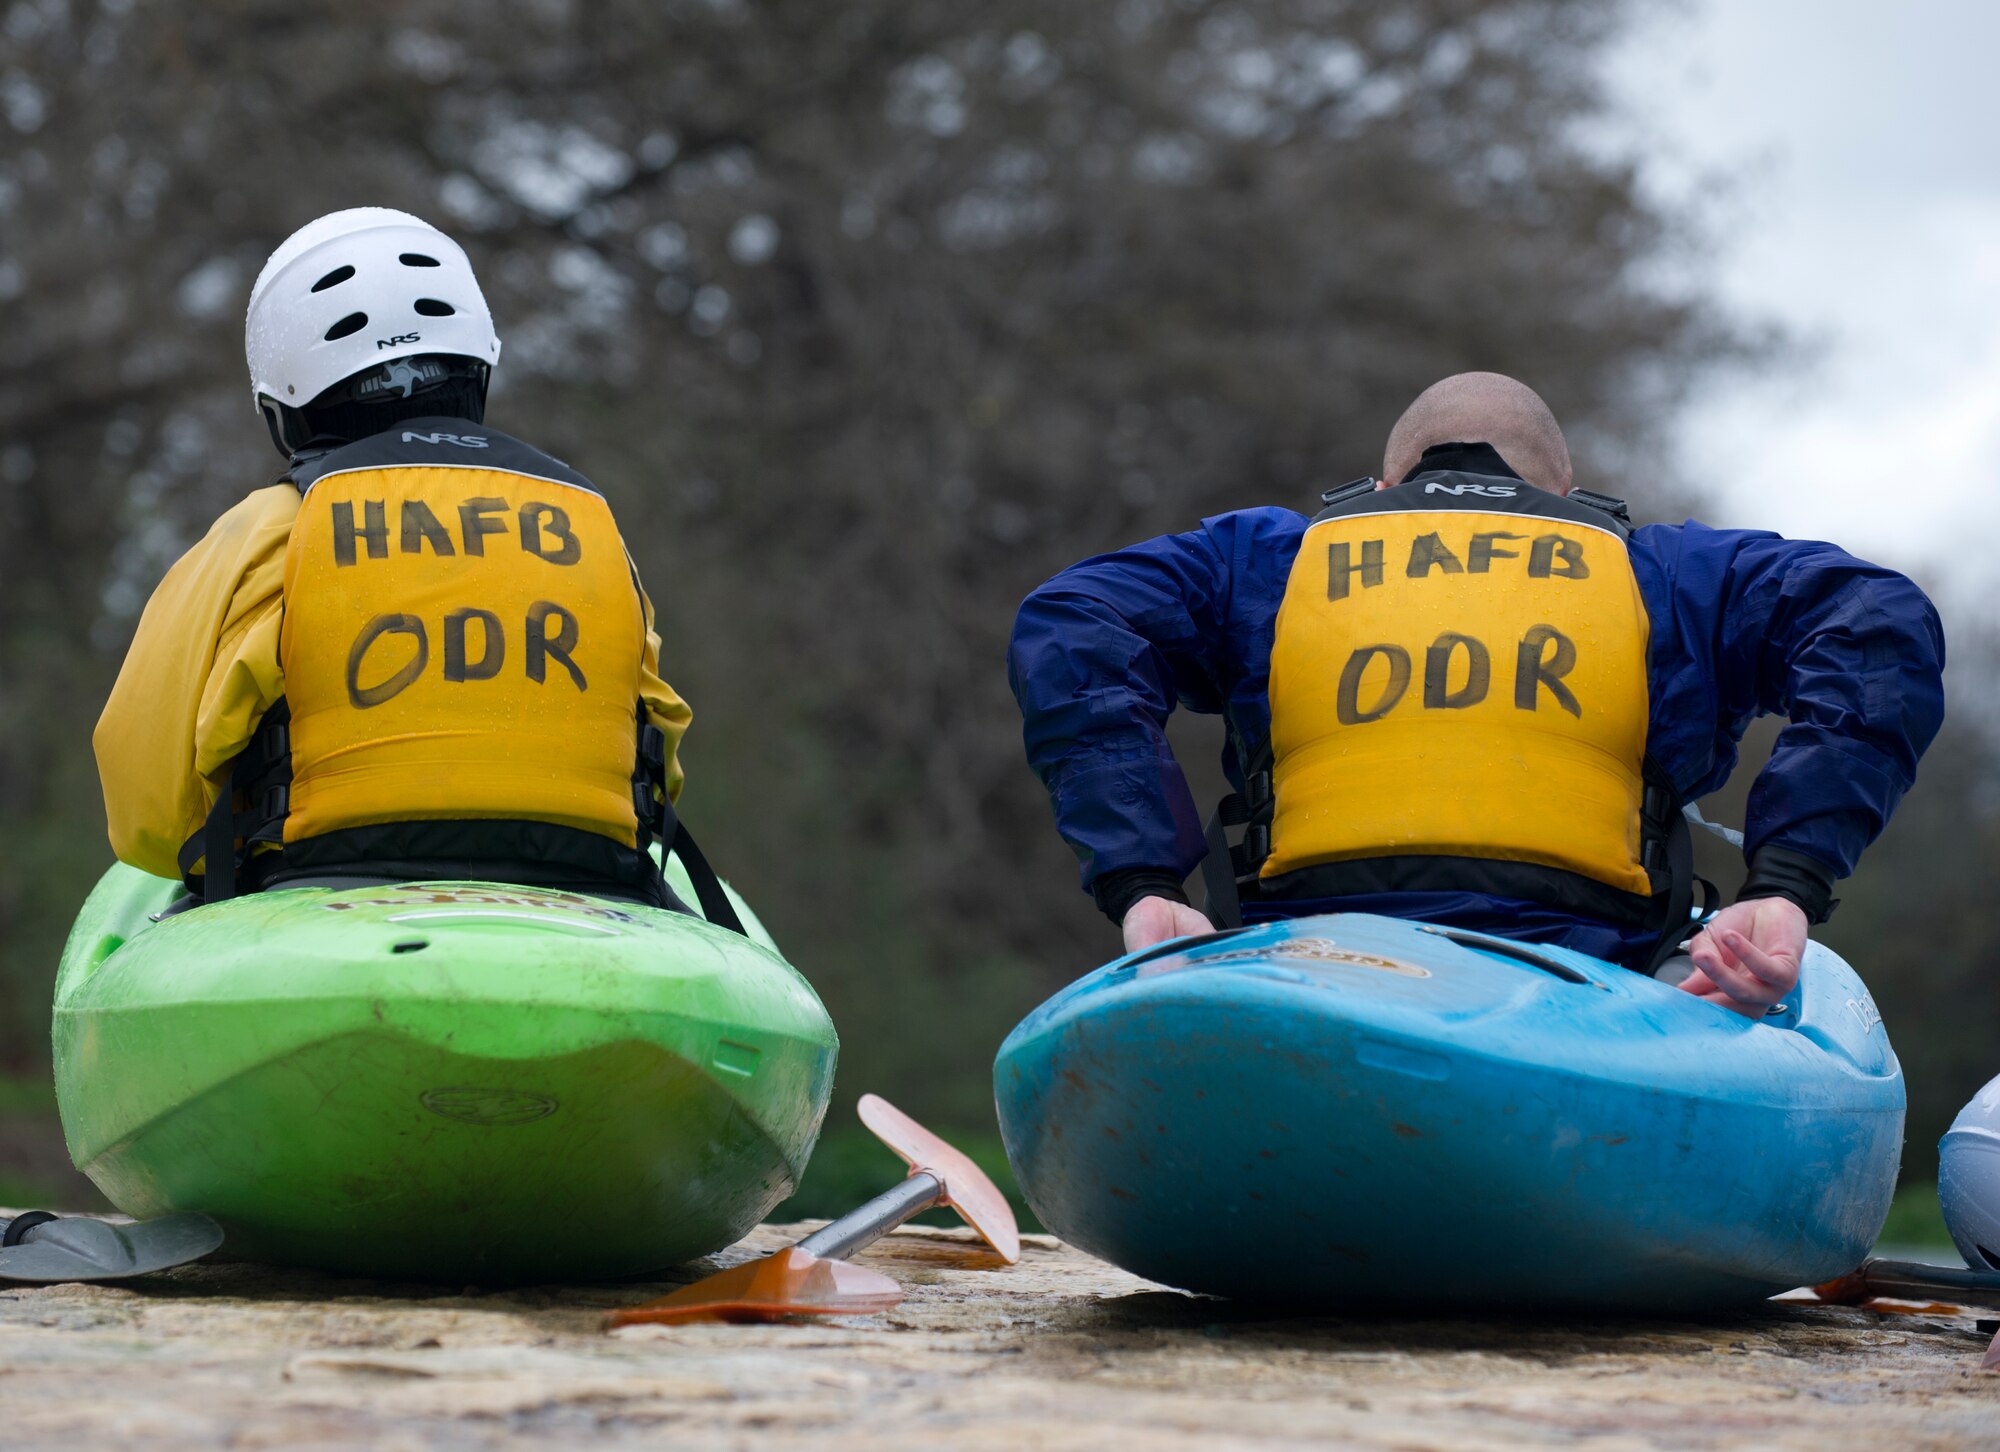 SAN MARCOS, Texas –- Amanda Gallagher, marketing director for the 49th Force Support Squadron, and U.S. Air Force Airman 1st Class Anthony Ward, 49th Wing public affairs, strap into their kayaks before preparing to shove off into the San Marcos River Feb. 19. The Airmen spouse and civilian were learning the basics of kayaking and white- water rapids in order to enable quick thinking and critical decision-making skills. As a part of the Holloman Outdoor Wingman Program, they also learned how to apply those same skills to everyday life. (U.S. Air Force photo by Airman 1st Class Daniel E. Liddicoet/Released)